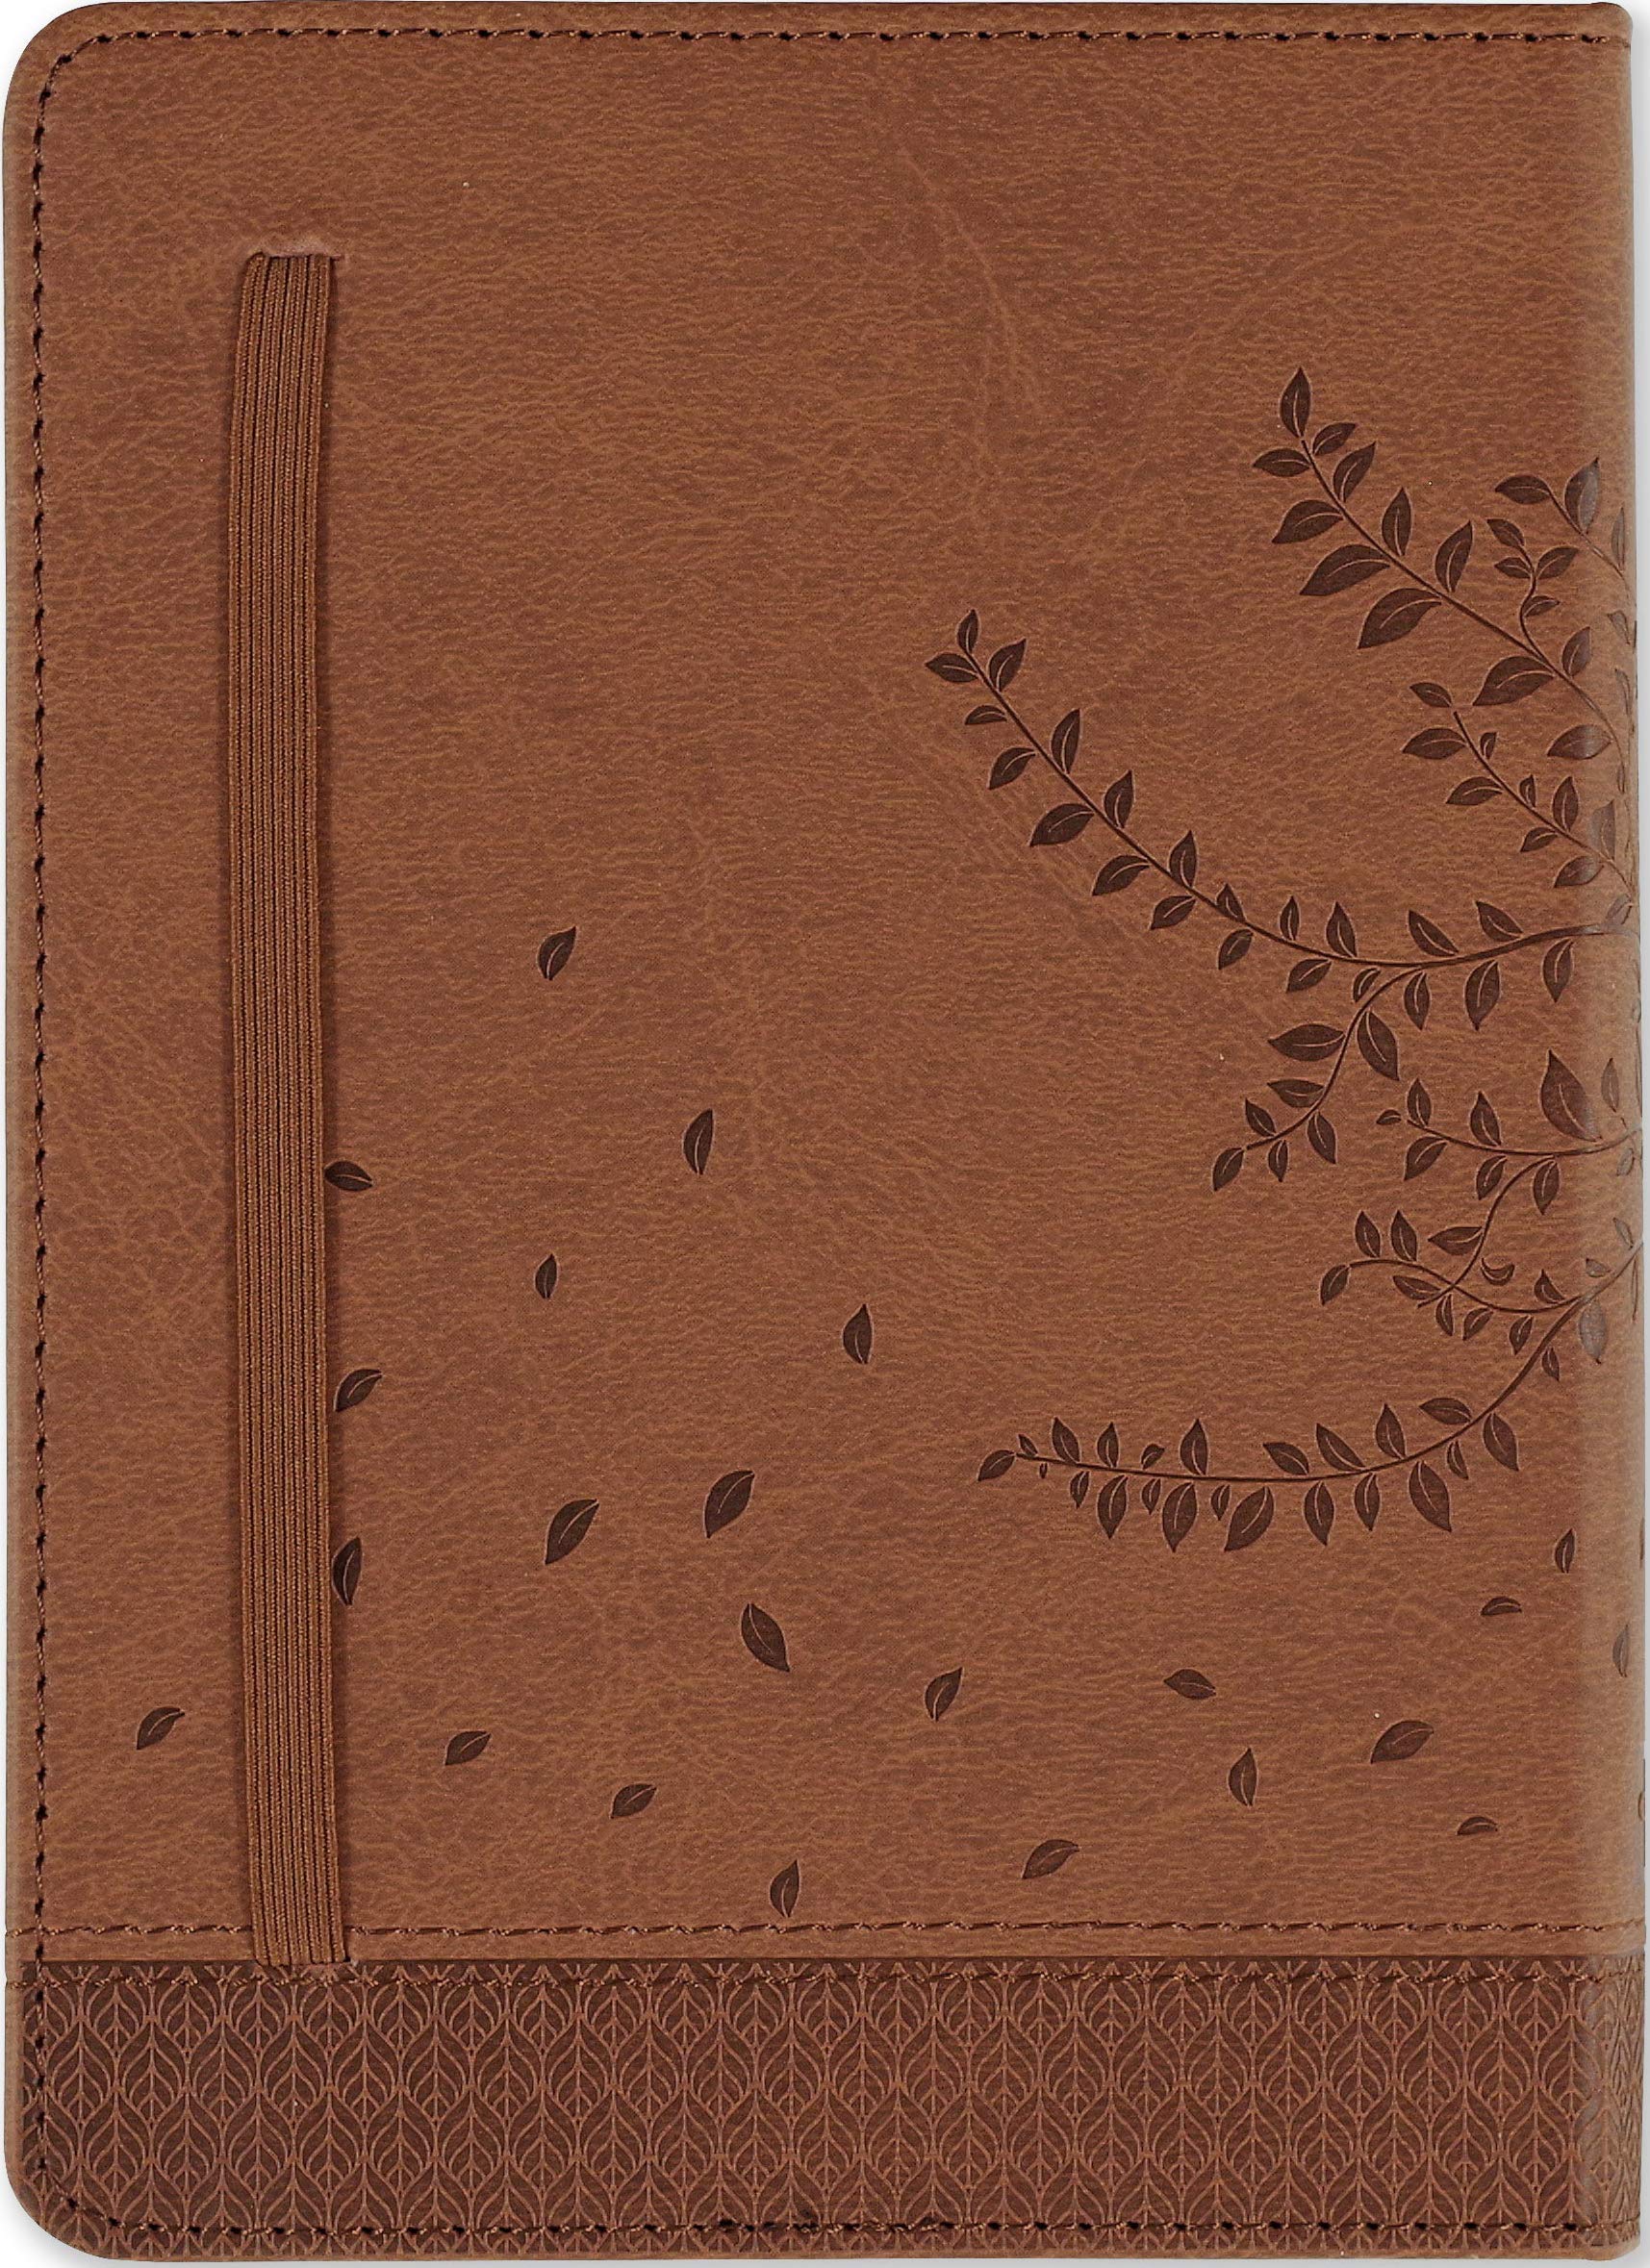 Tree of Life Journal - Lined Vegan Leather Notebook